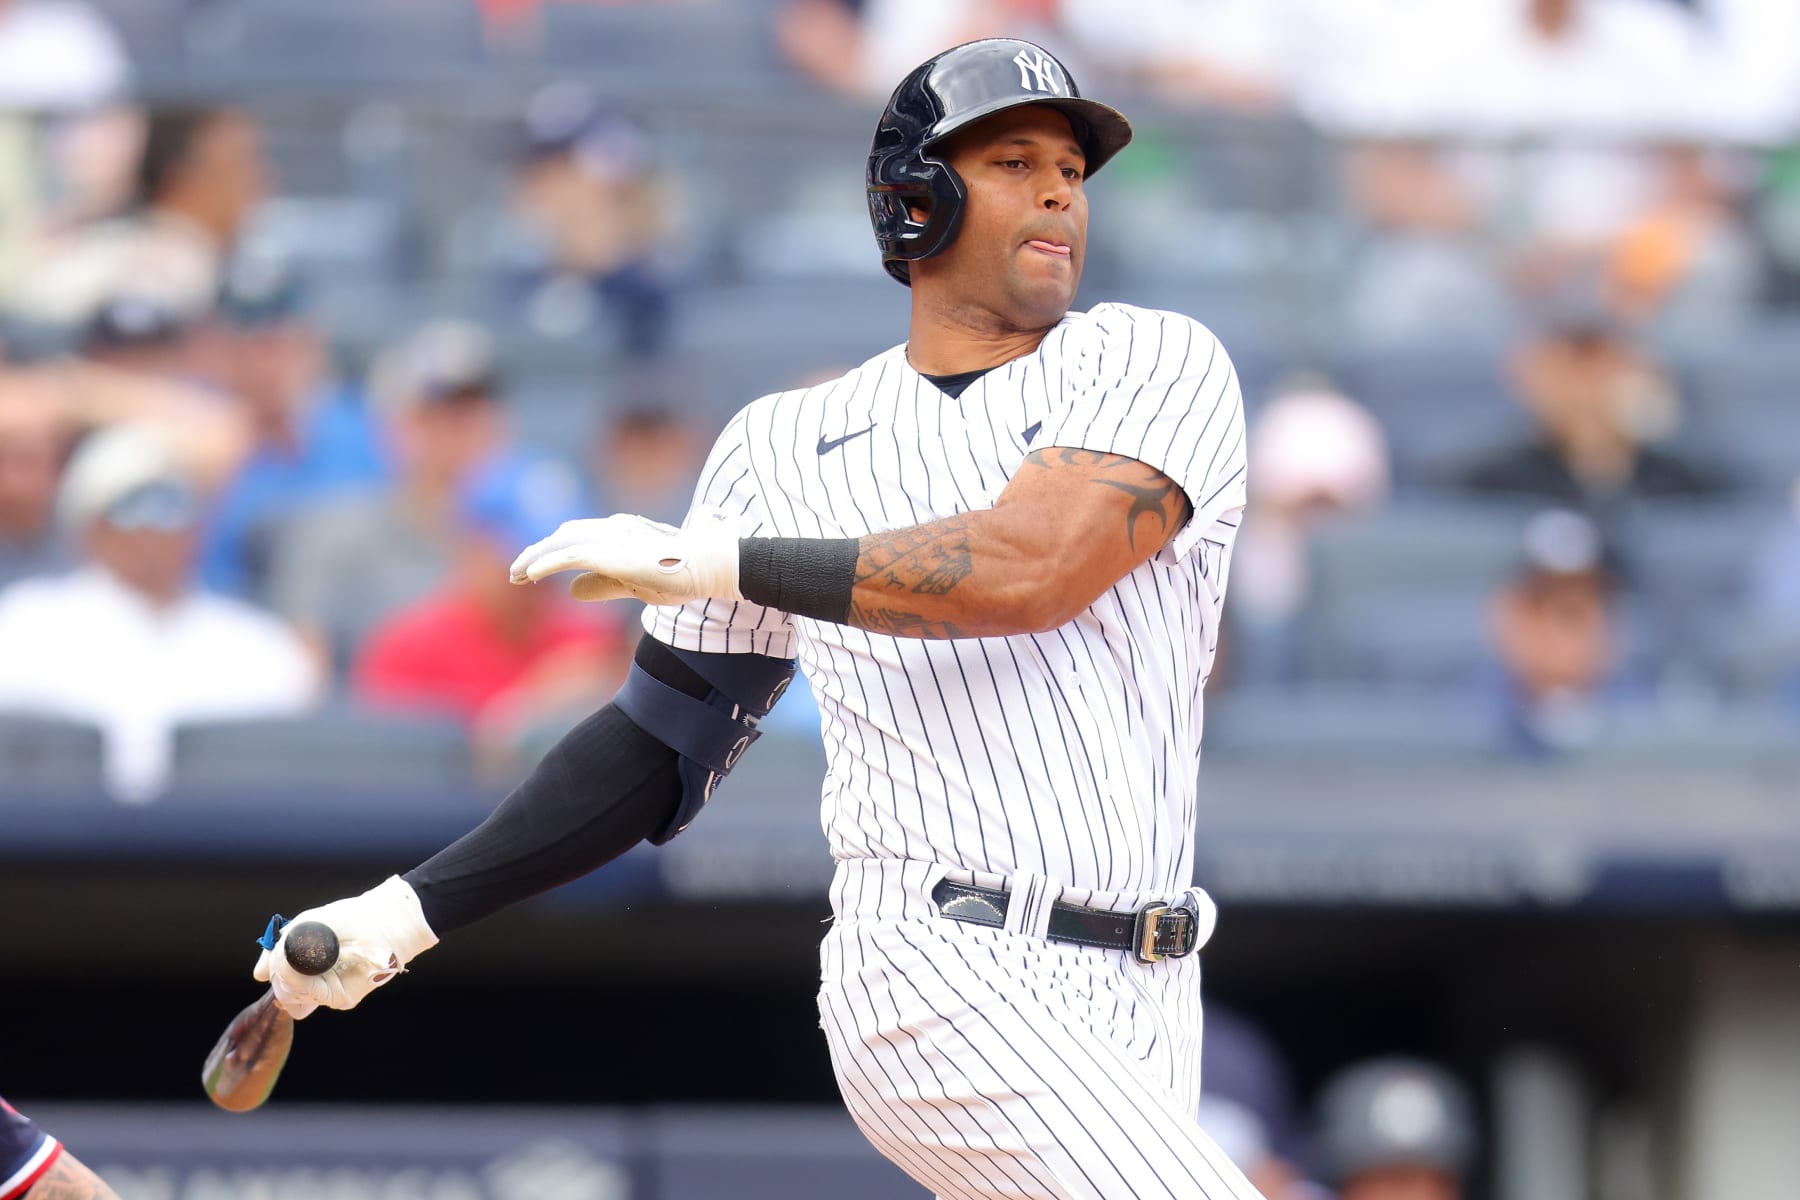 Aaron Hicks aims for Winter Ball; Yankees assessing free agency